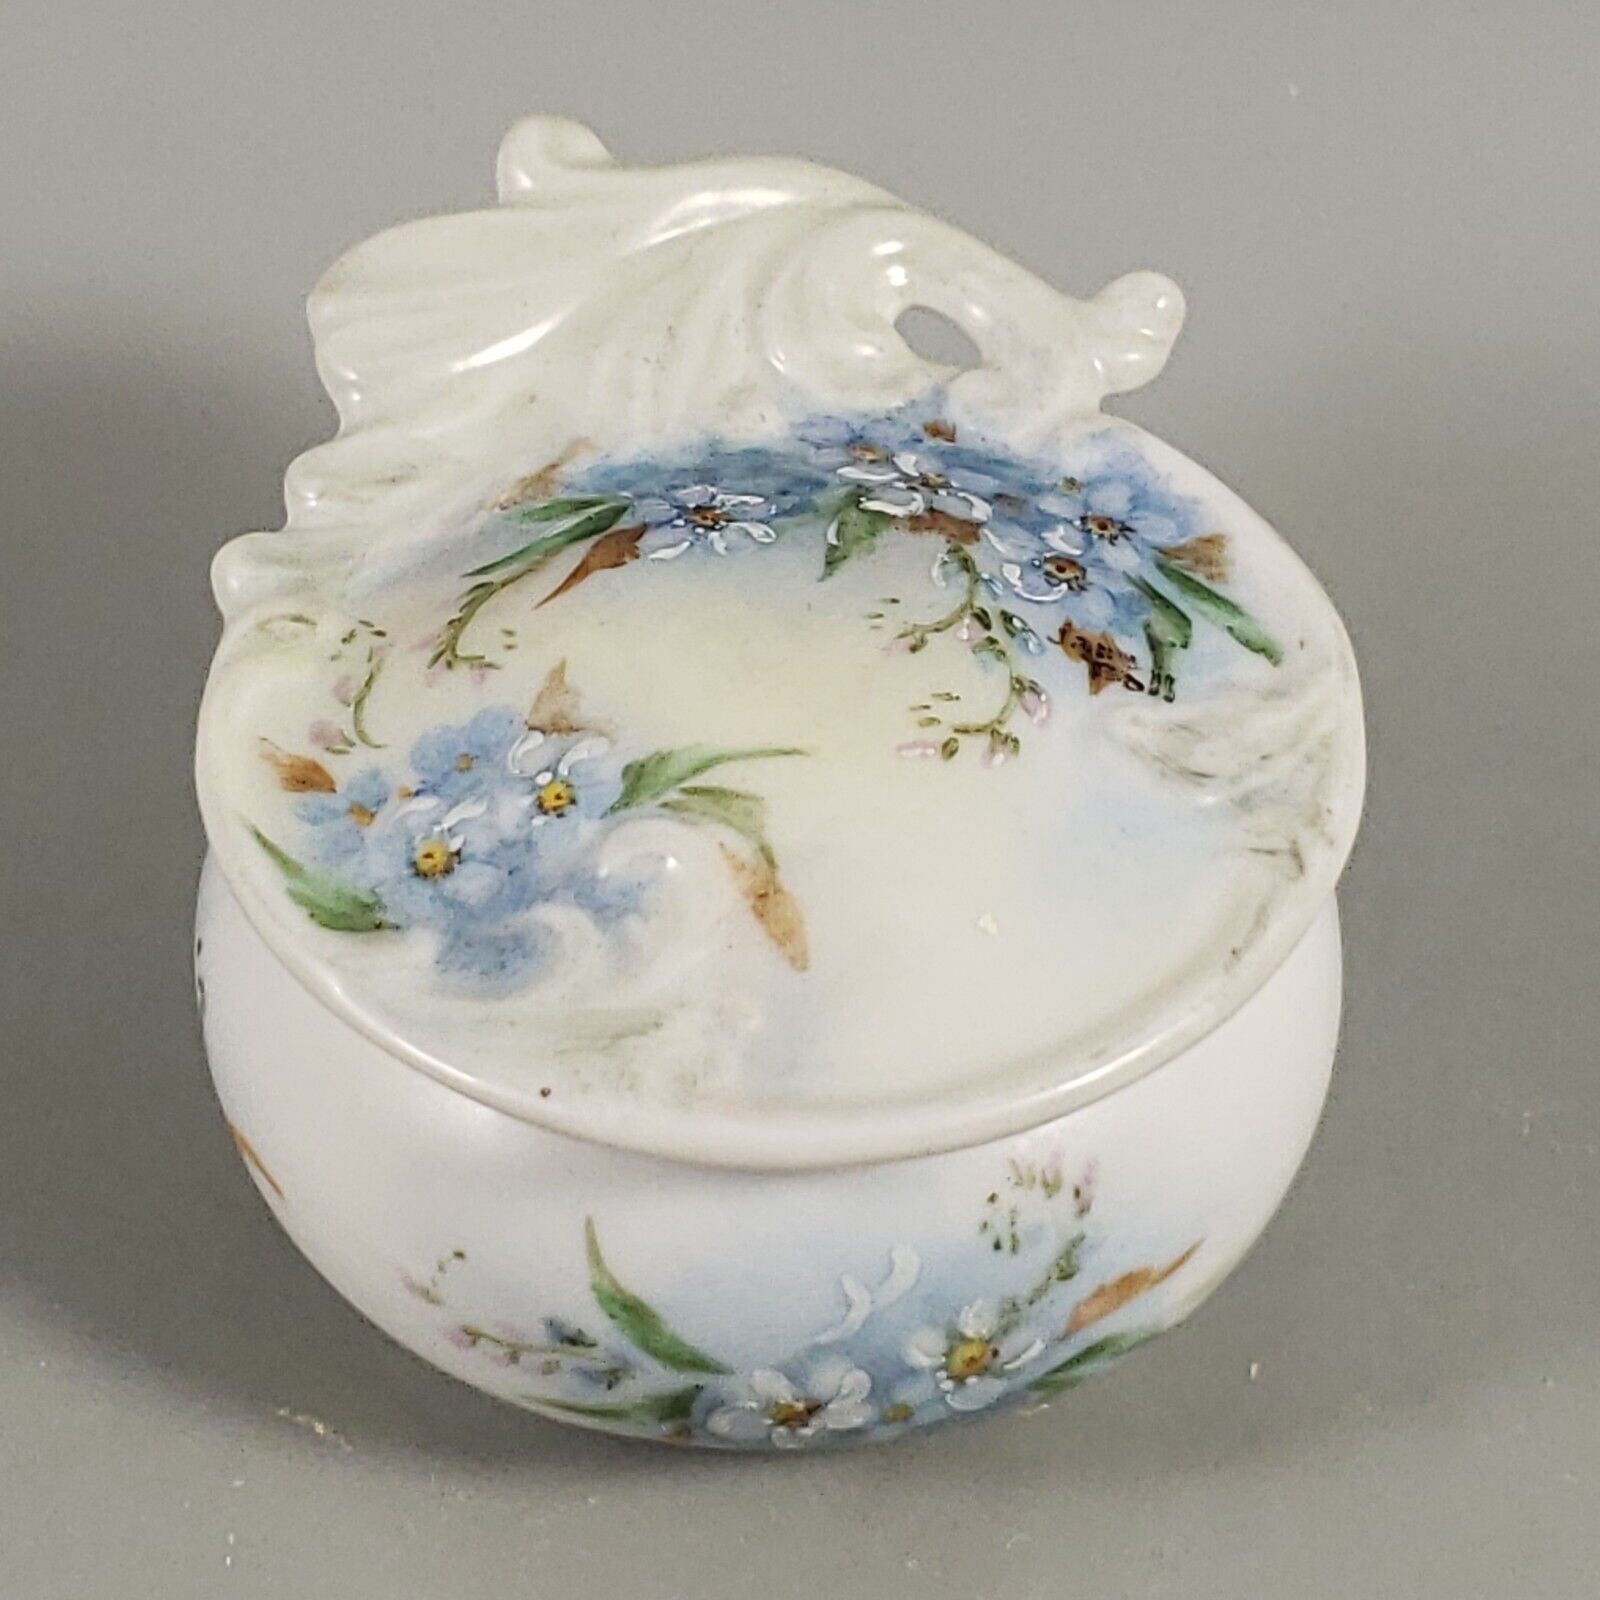 Vintage Antique Hand Painted Forget Me Not SIGNED Porcelain Jewelry Trinket Dish